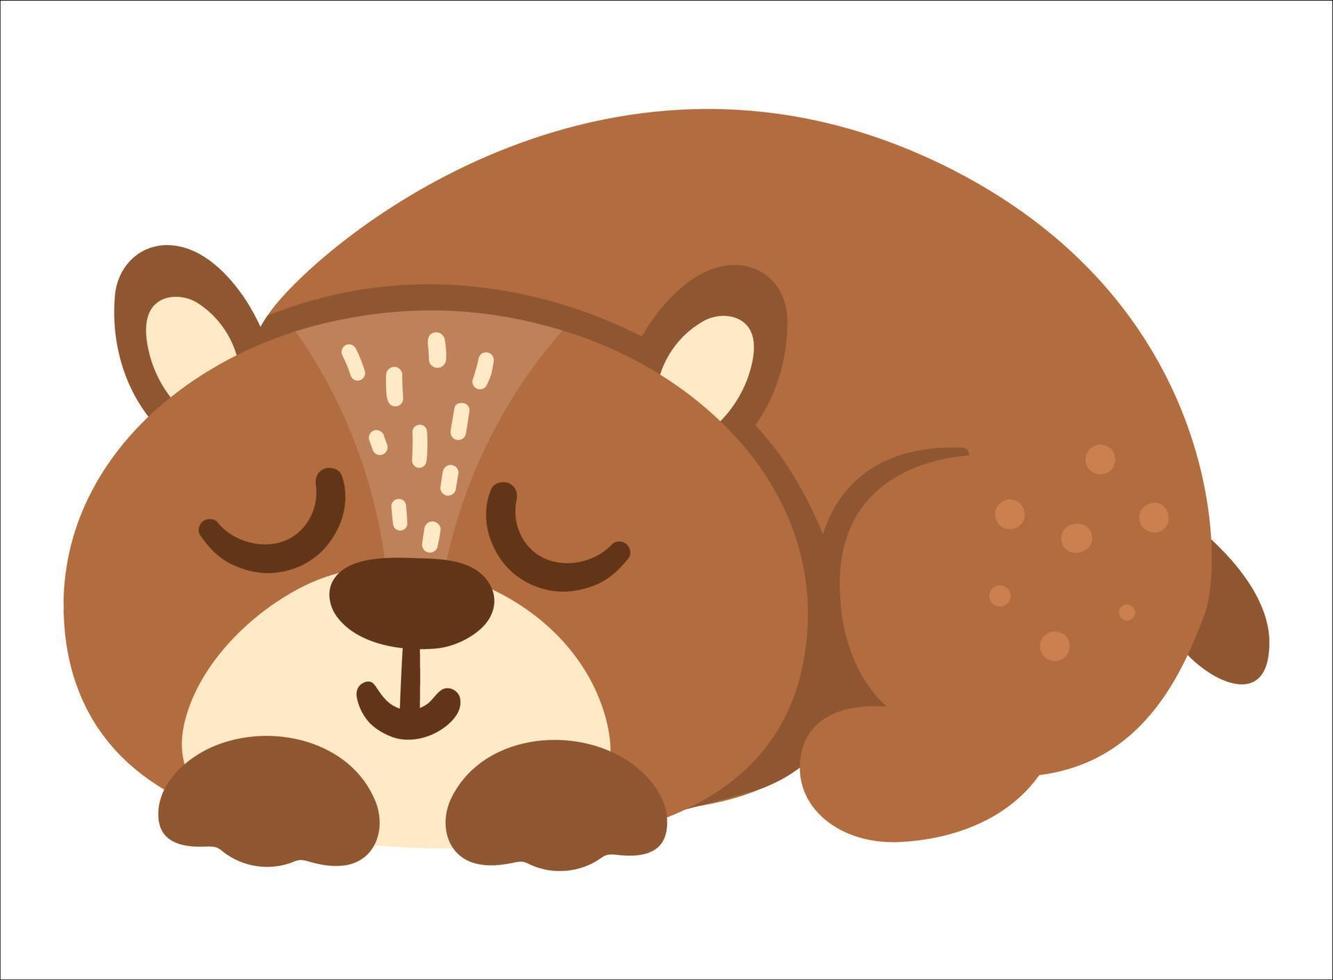 Vector hand drawn baby bear. Cute bohemian style little woodland animal icon isolated on white background. Sweet boho forest illustration for card, print, stationery design.